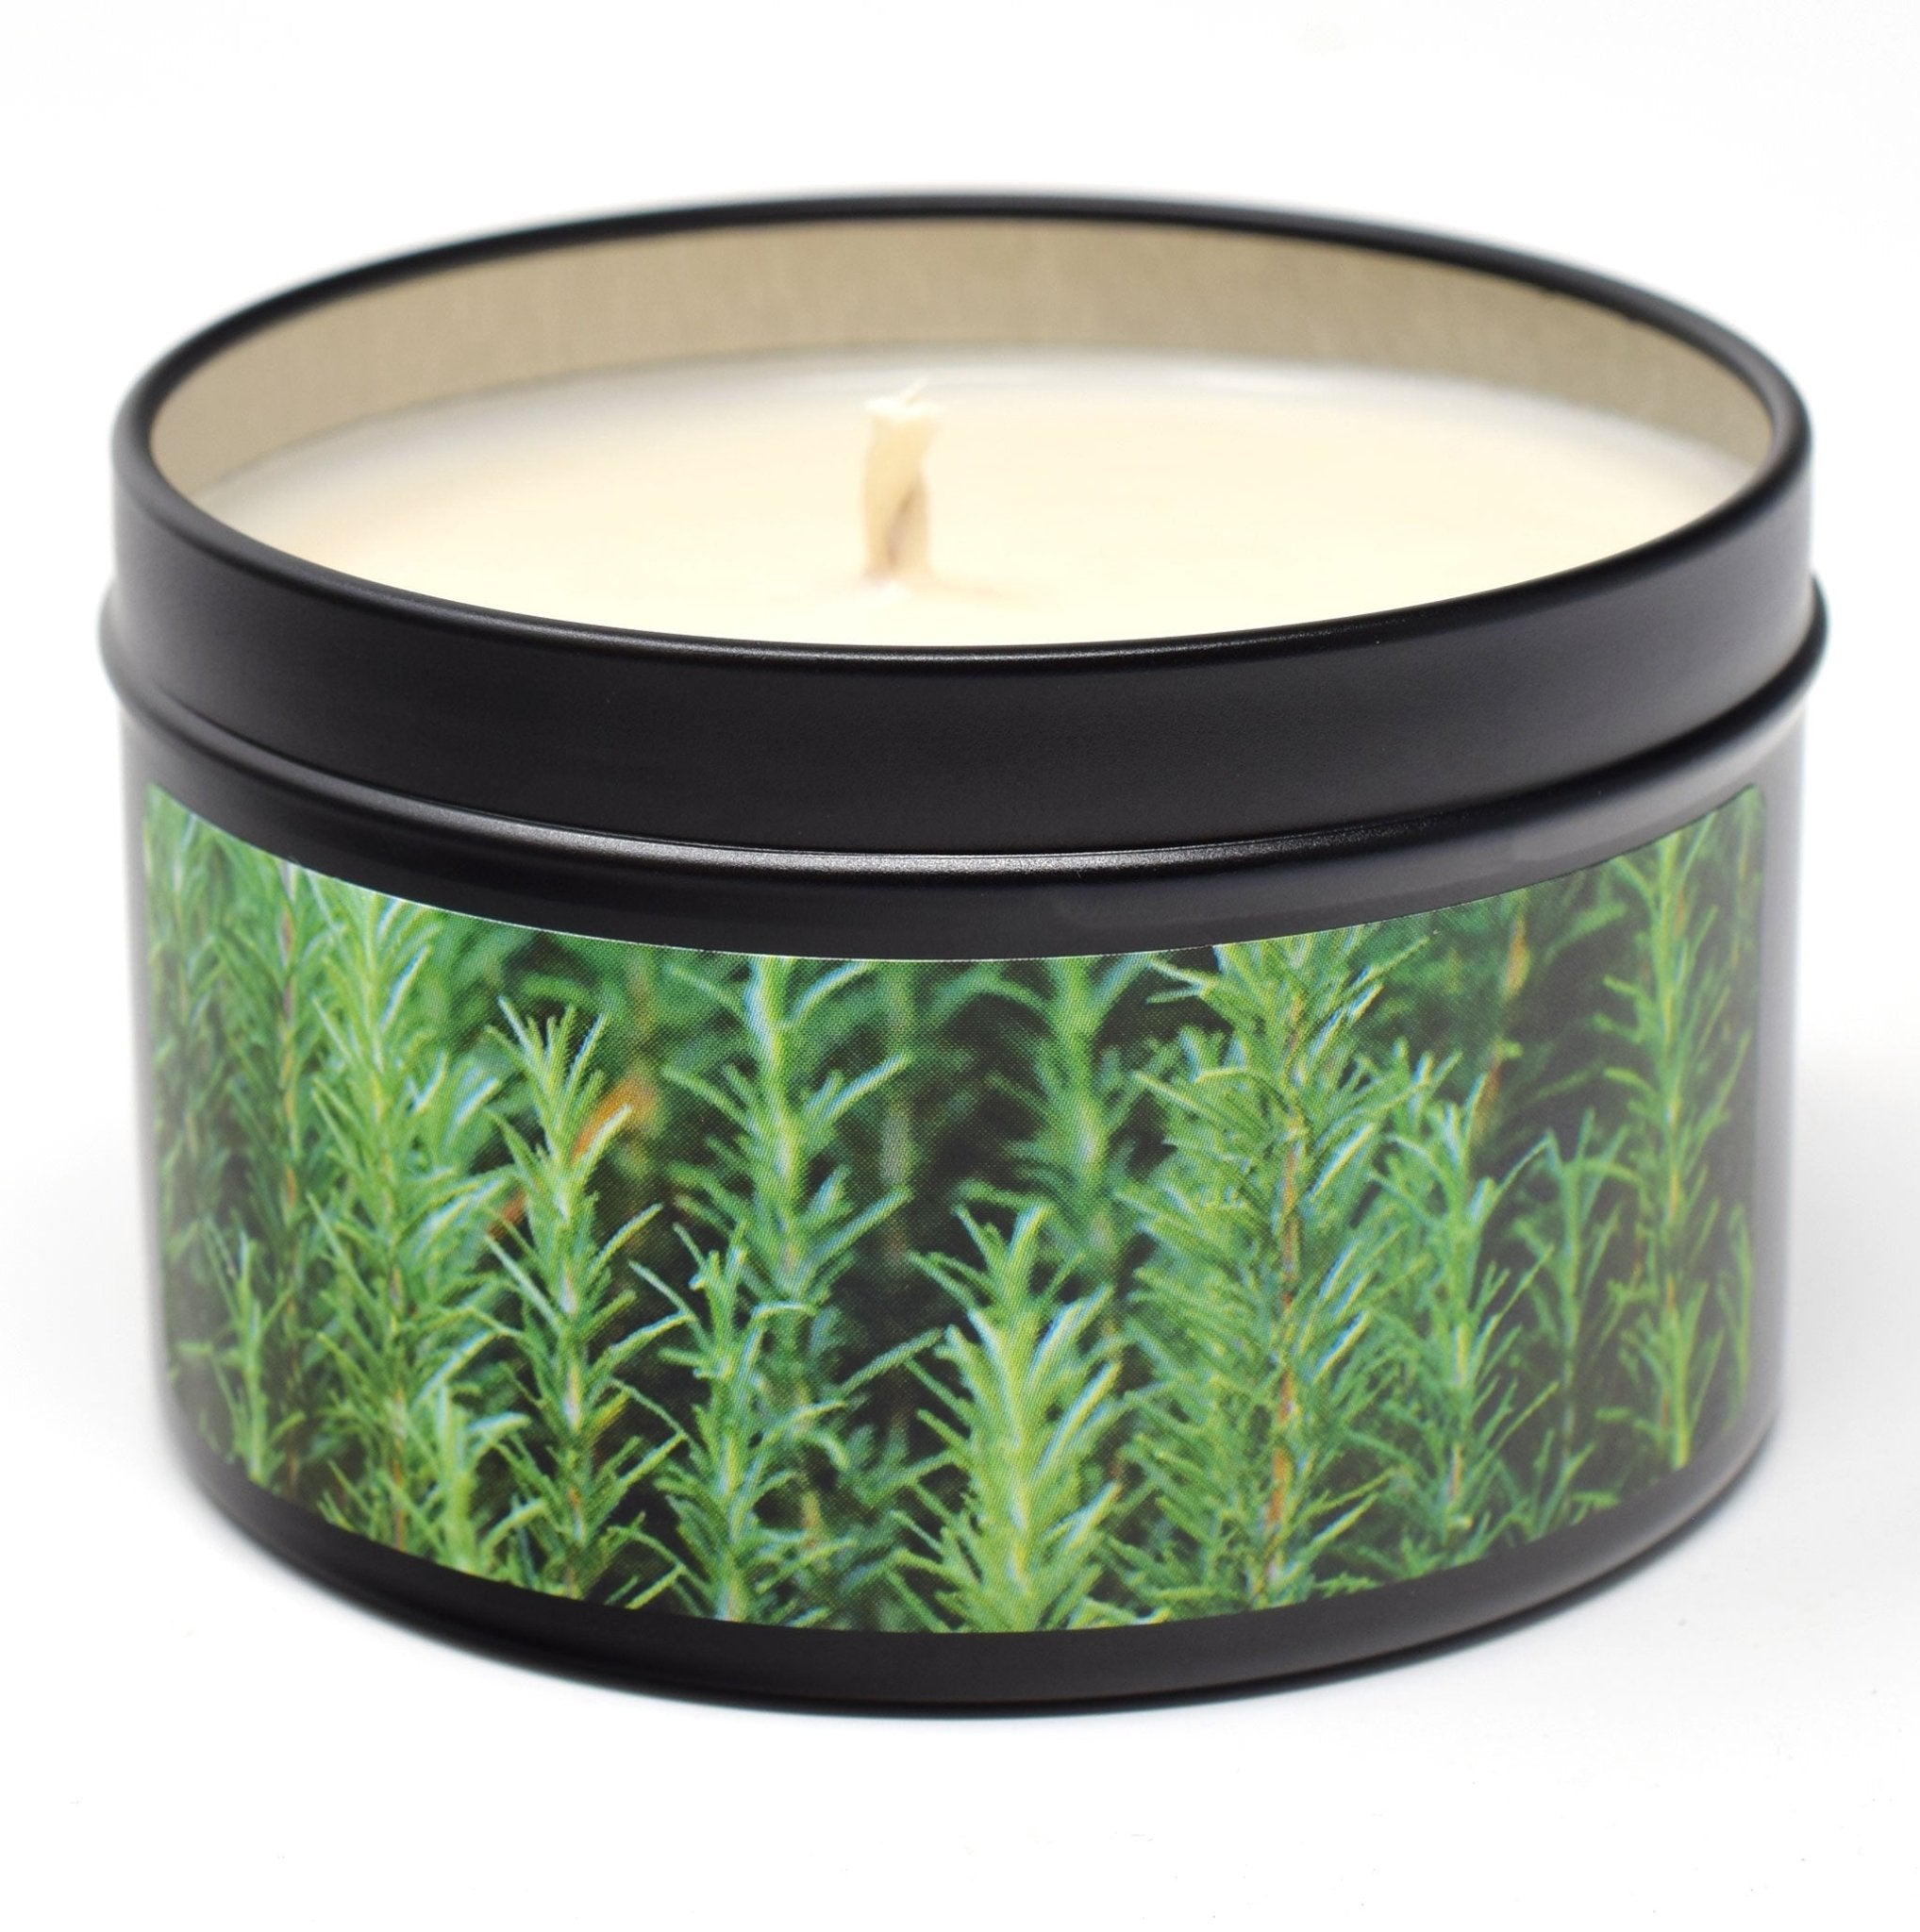 Rosemary Mint Essential Oil, 6oz Soy Candle Tin - Candeo Candle